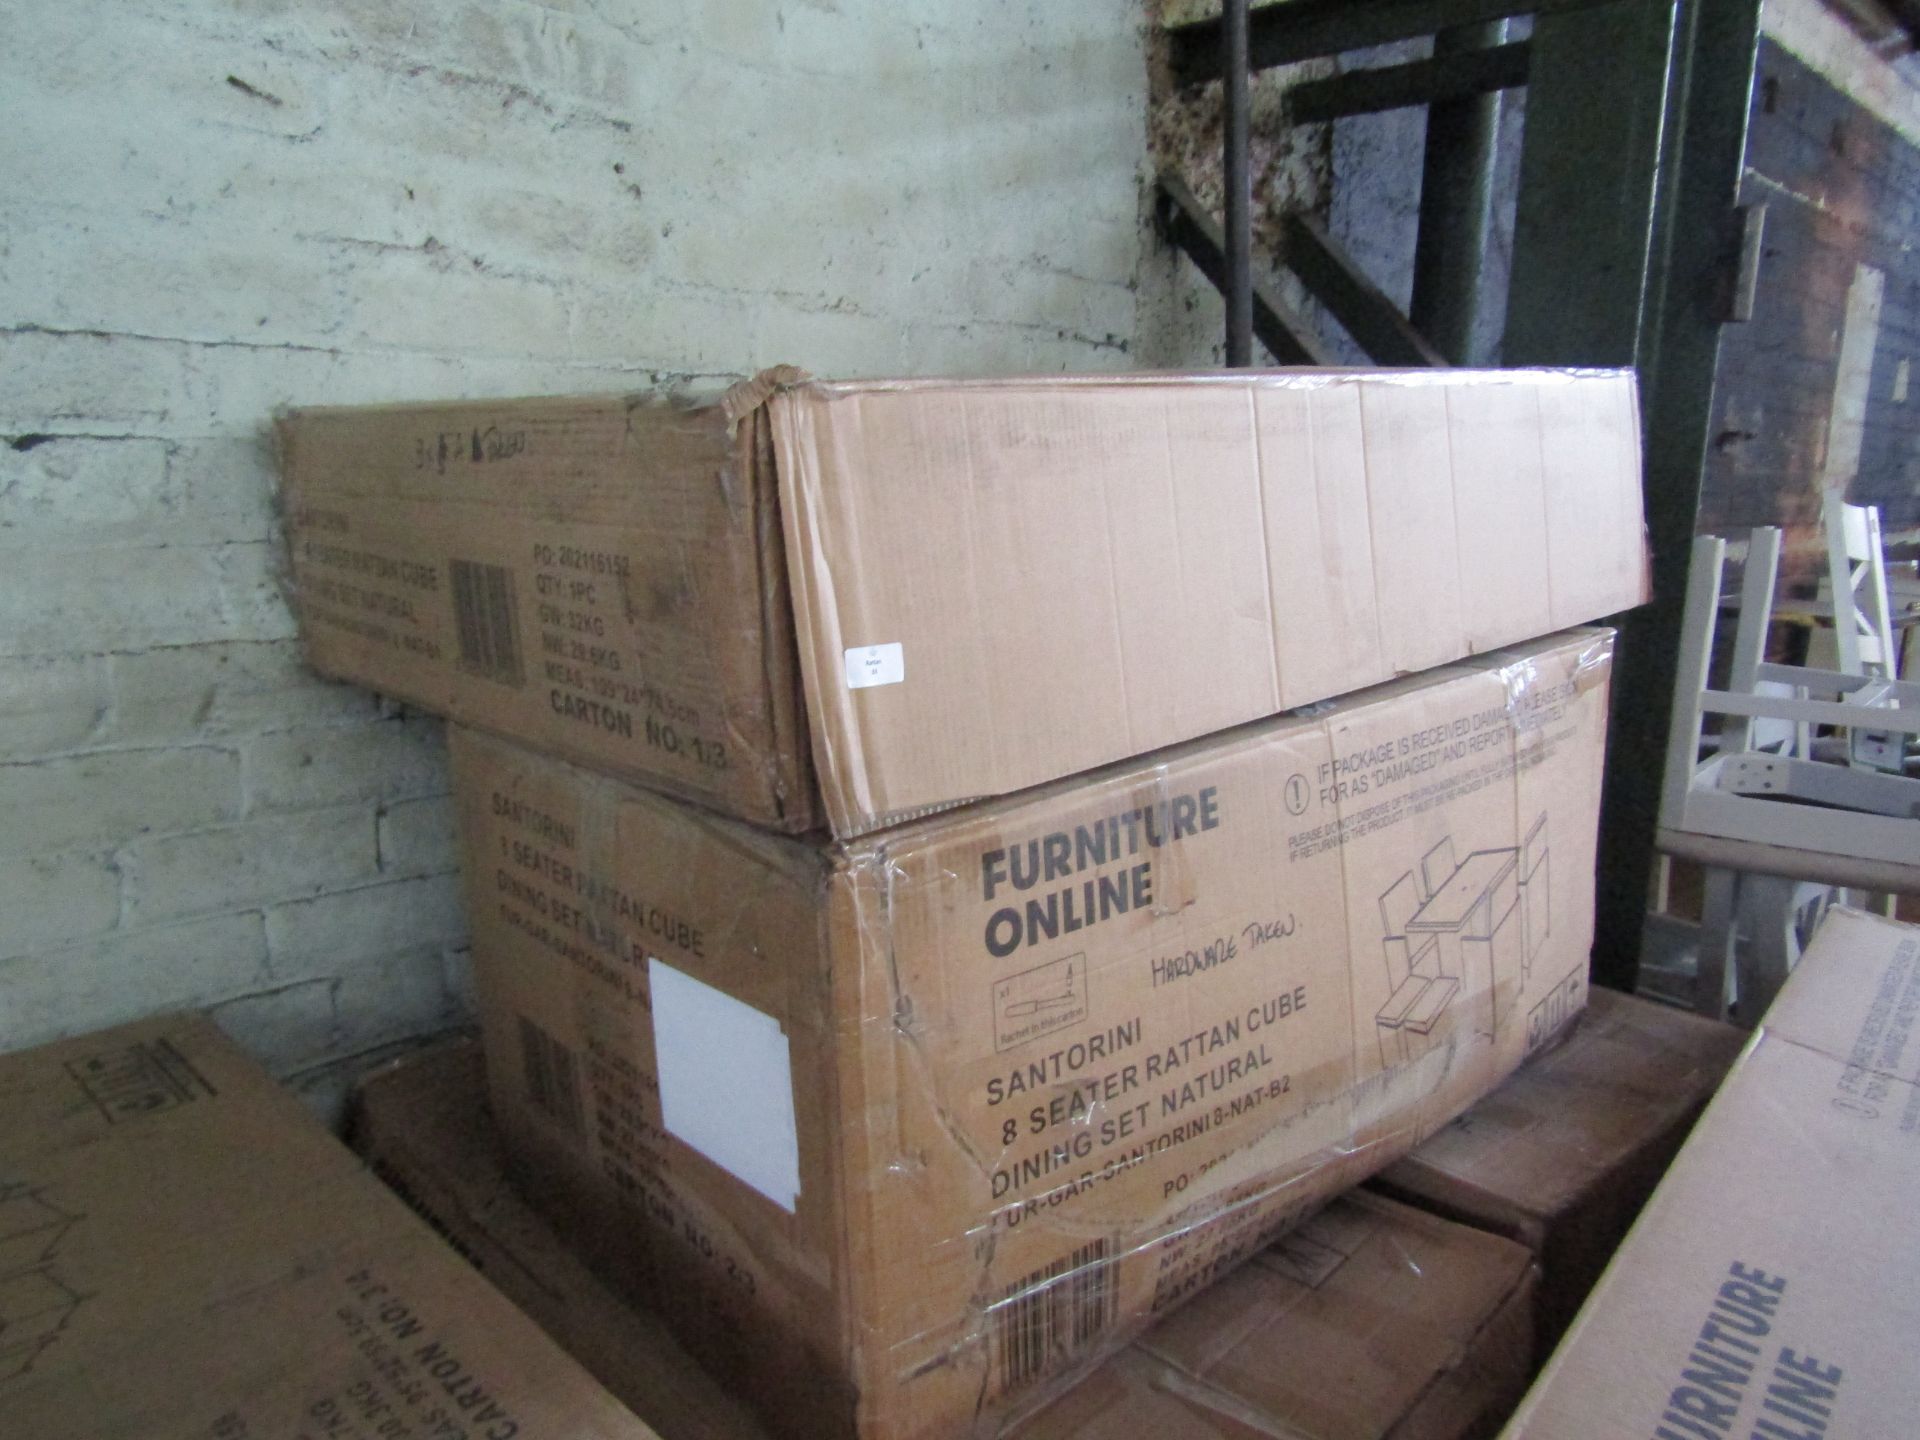 2 x boxes of Furniture Online Ex-Retail Customer Returns Mixed Lot - Total RRP est. 866 About the - Image 2 of 2